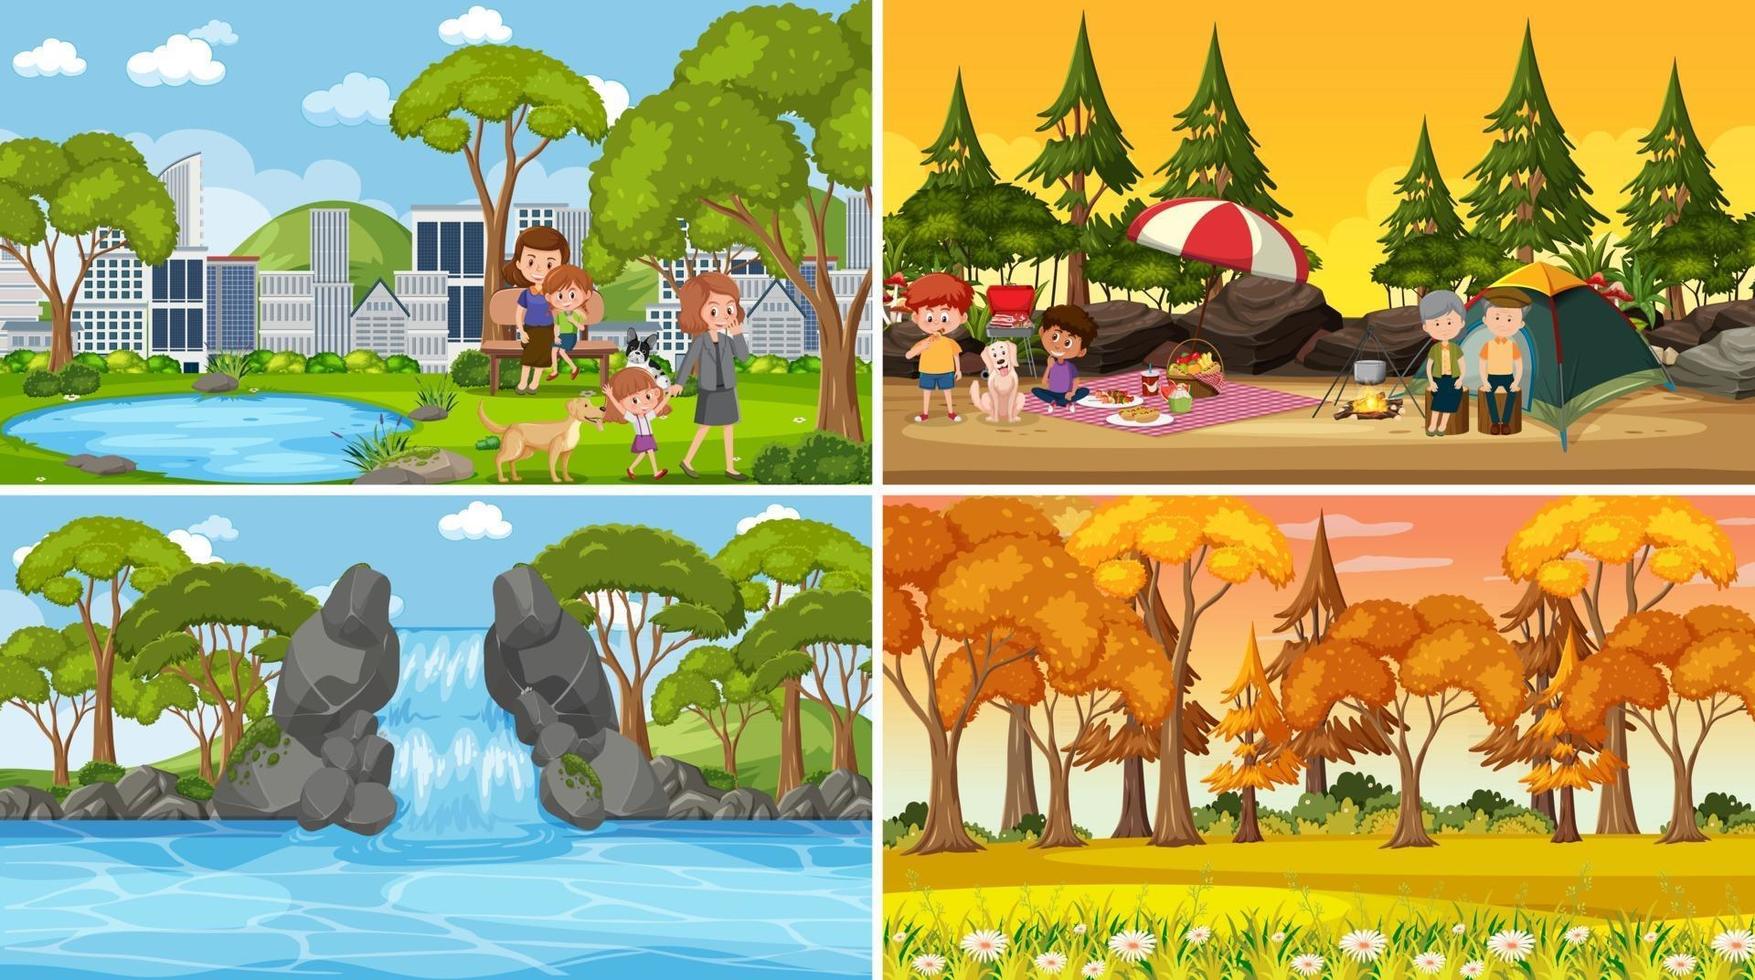 Set of different nature scenes cartoon style vector